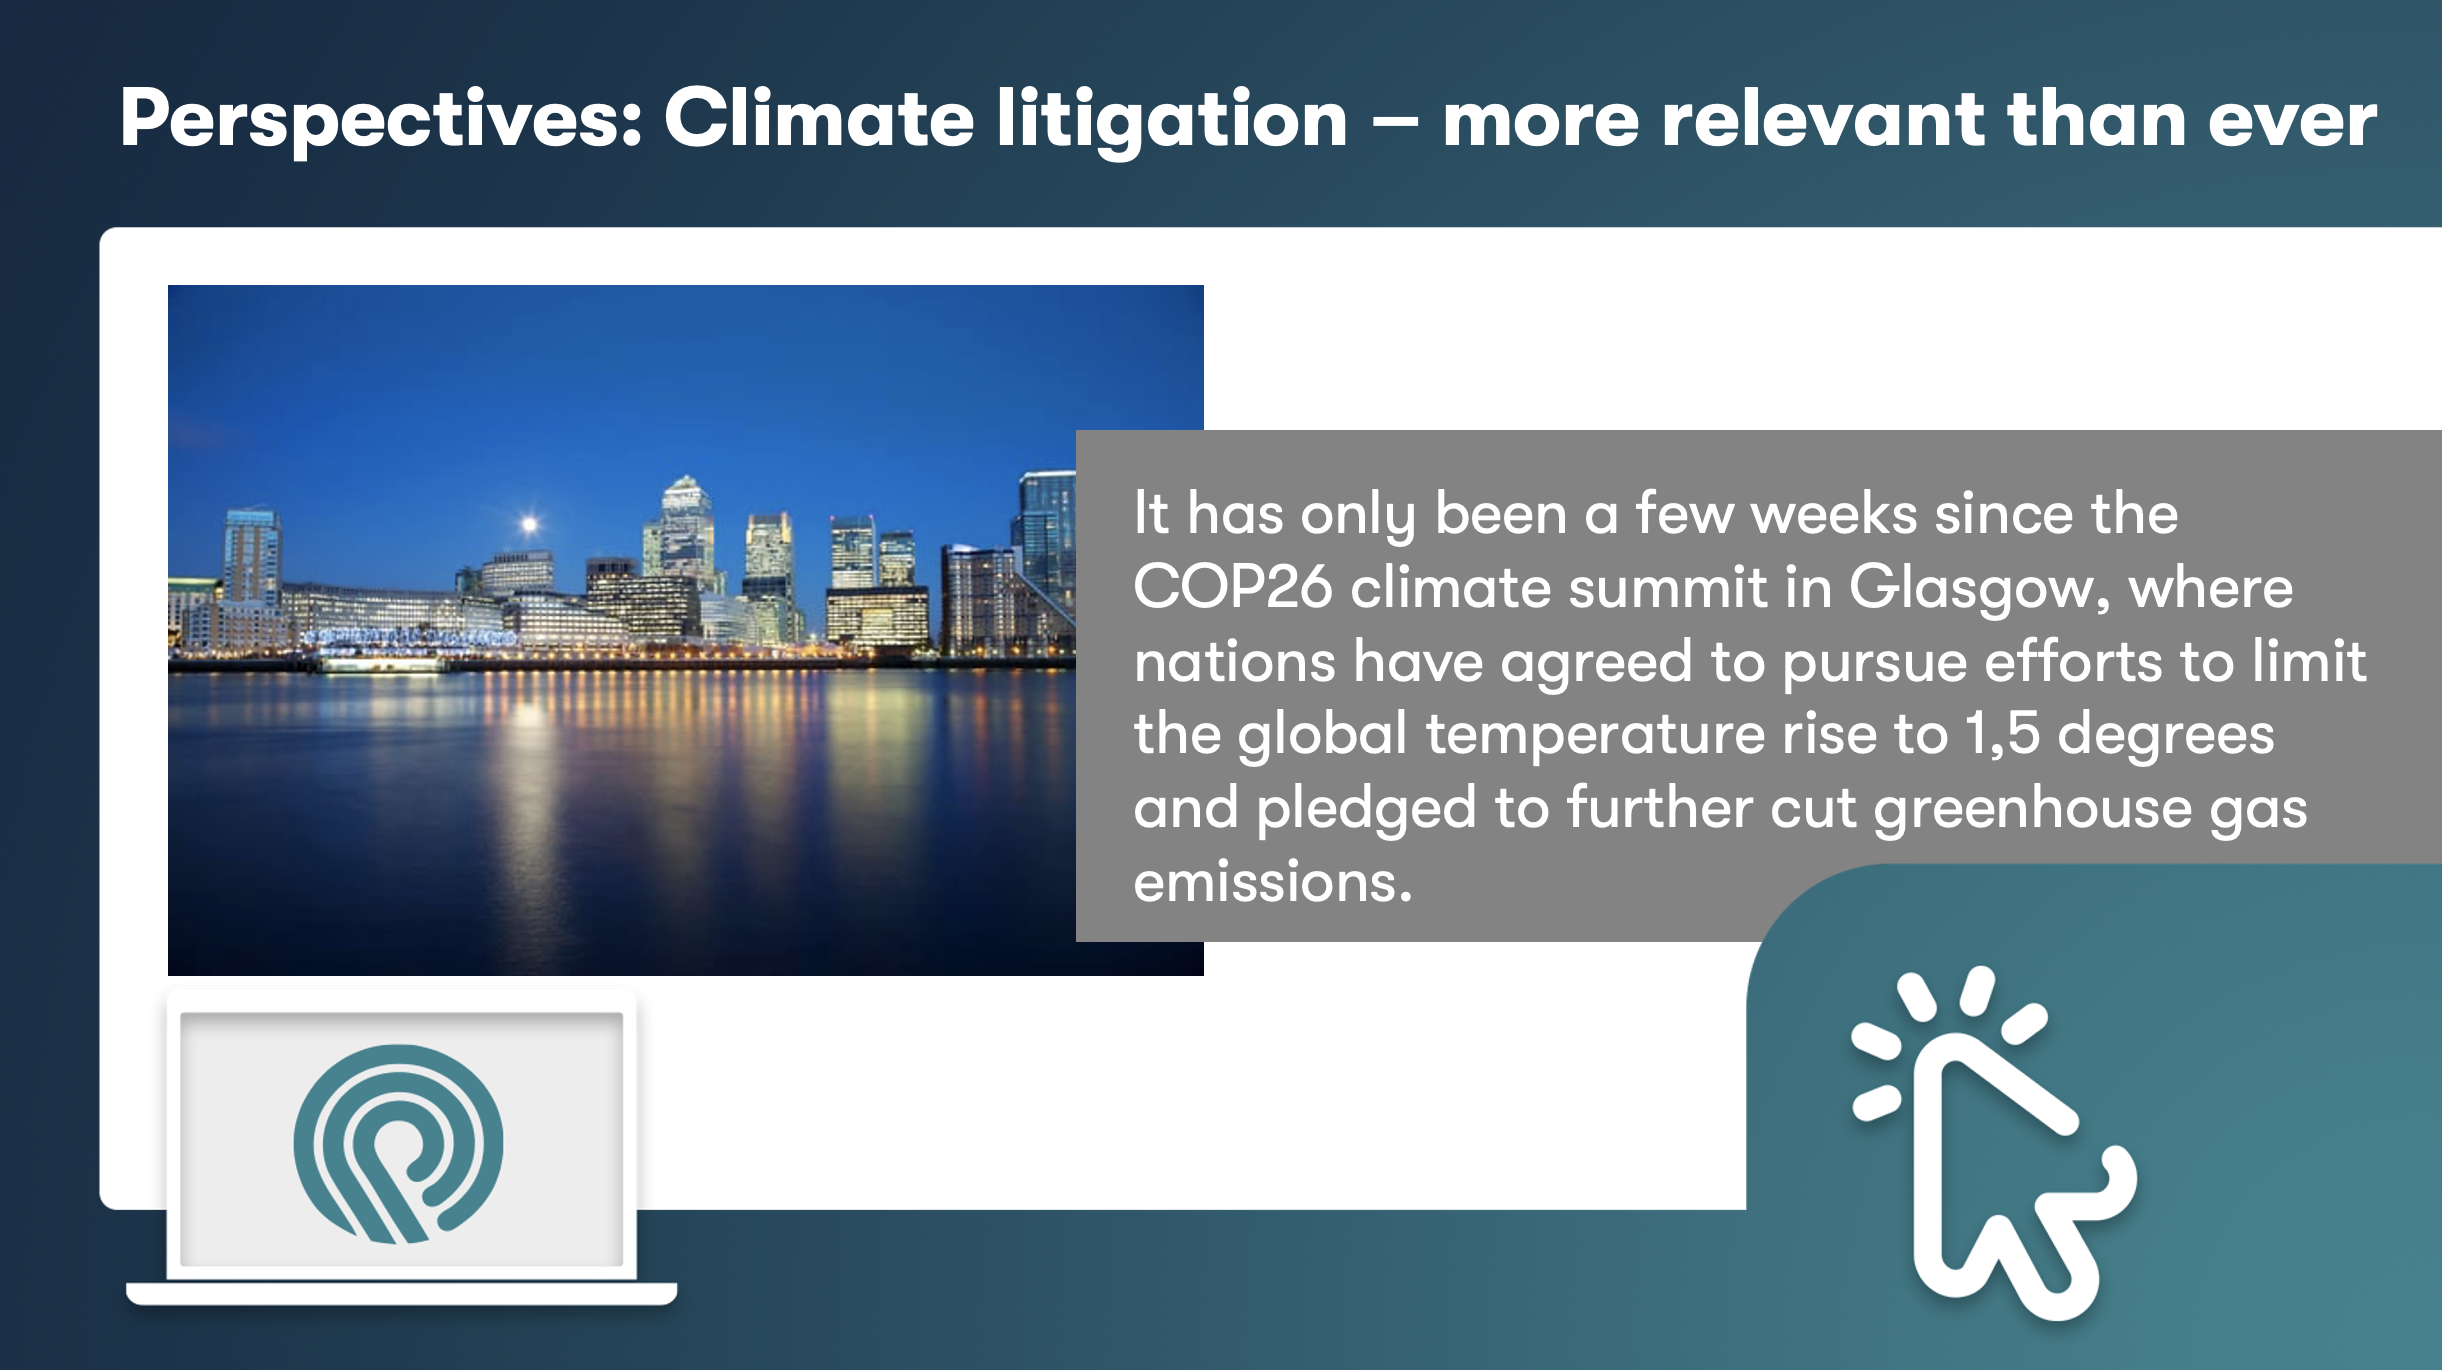 Perspectives: Climate litigation – more relevant than ever